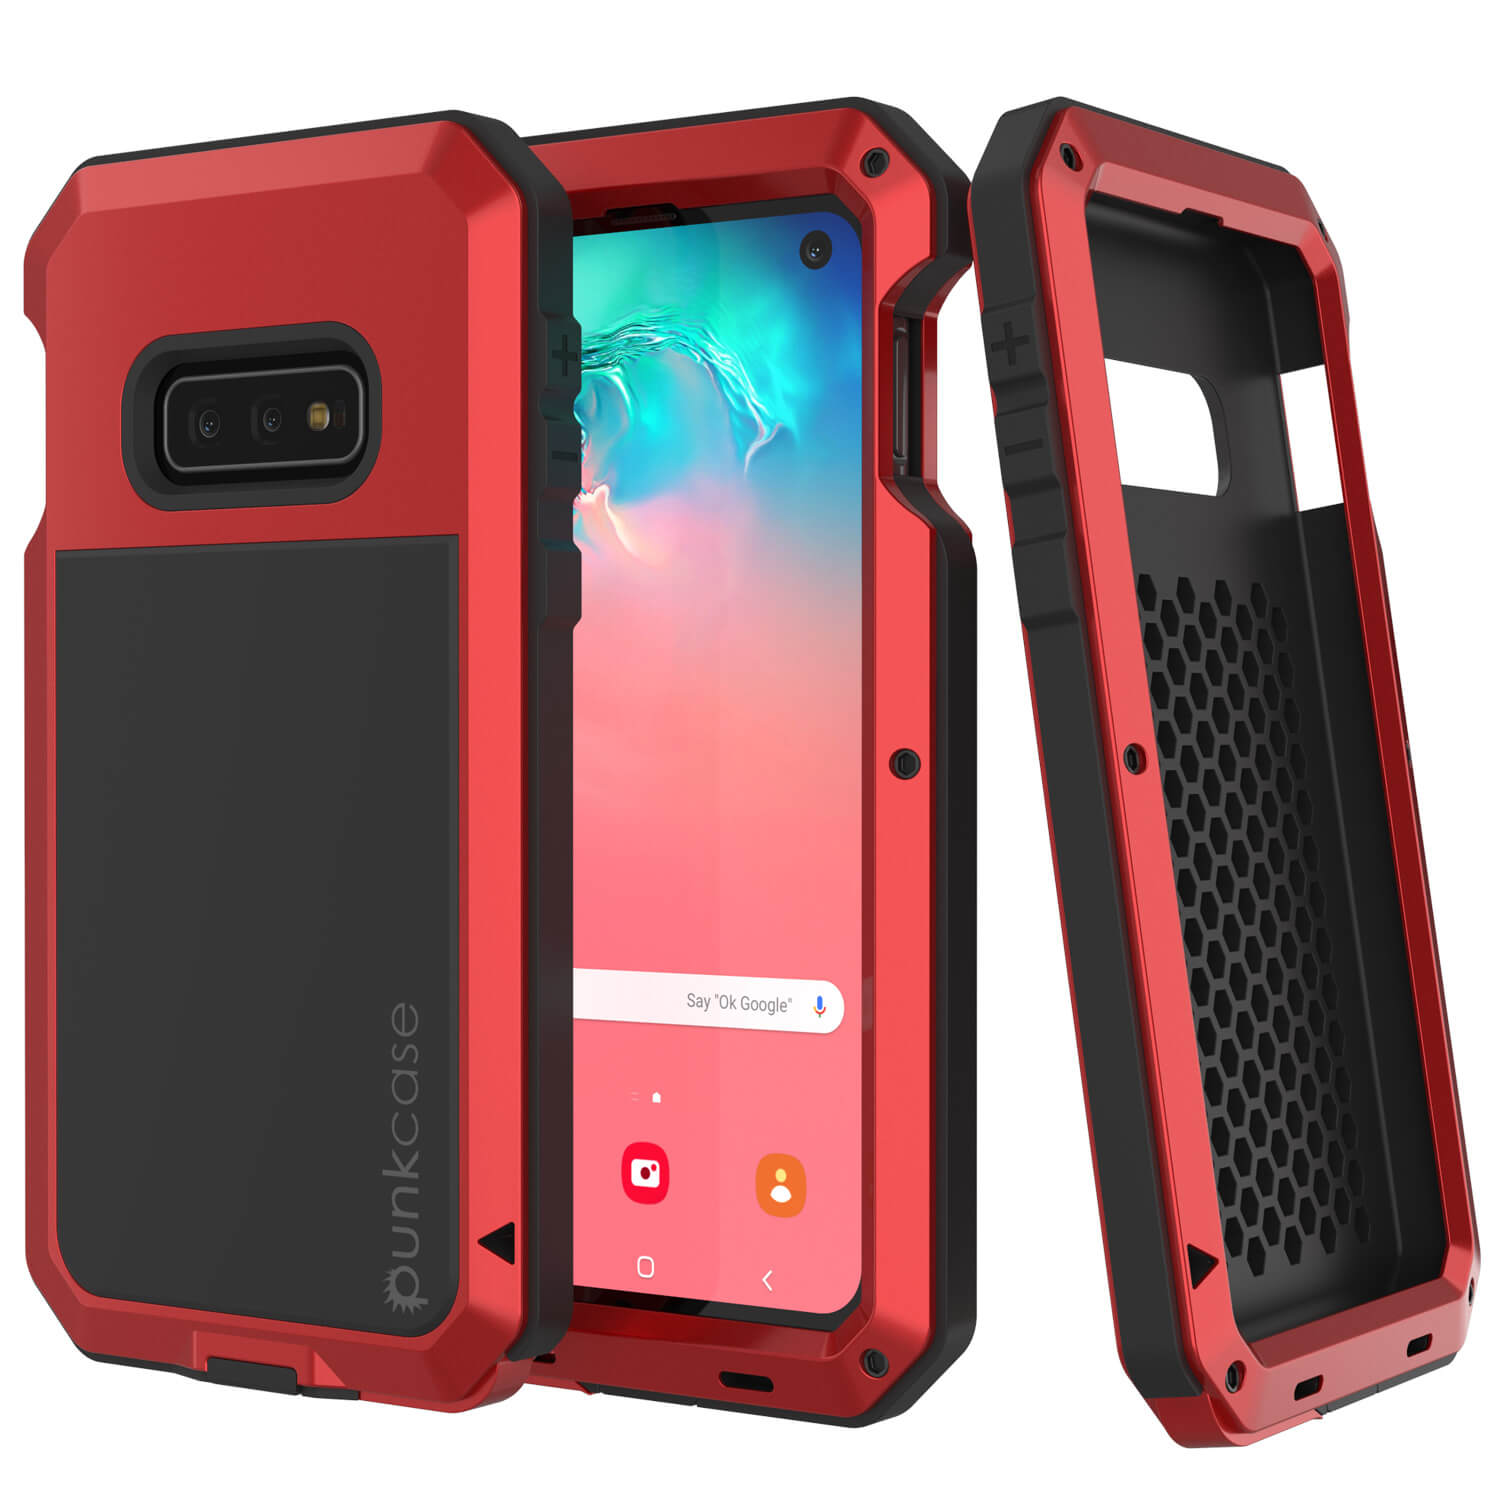 Galaxy S10e Metal Case, Heavy Military Grade Rugged Armor Cover [ punkcase